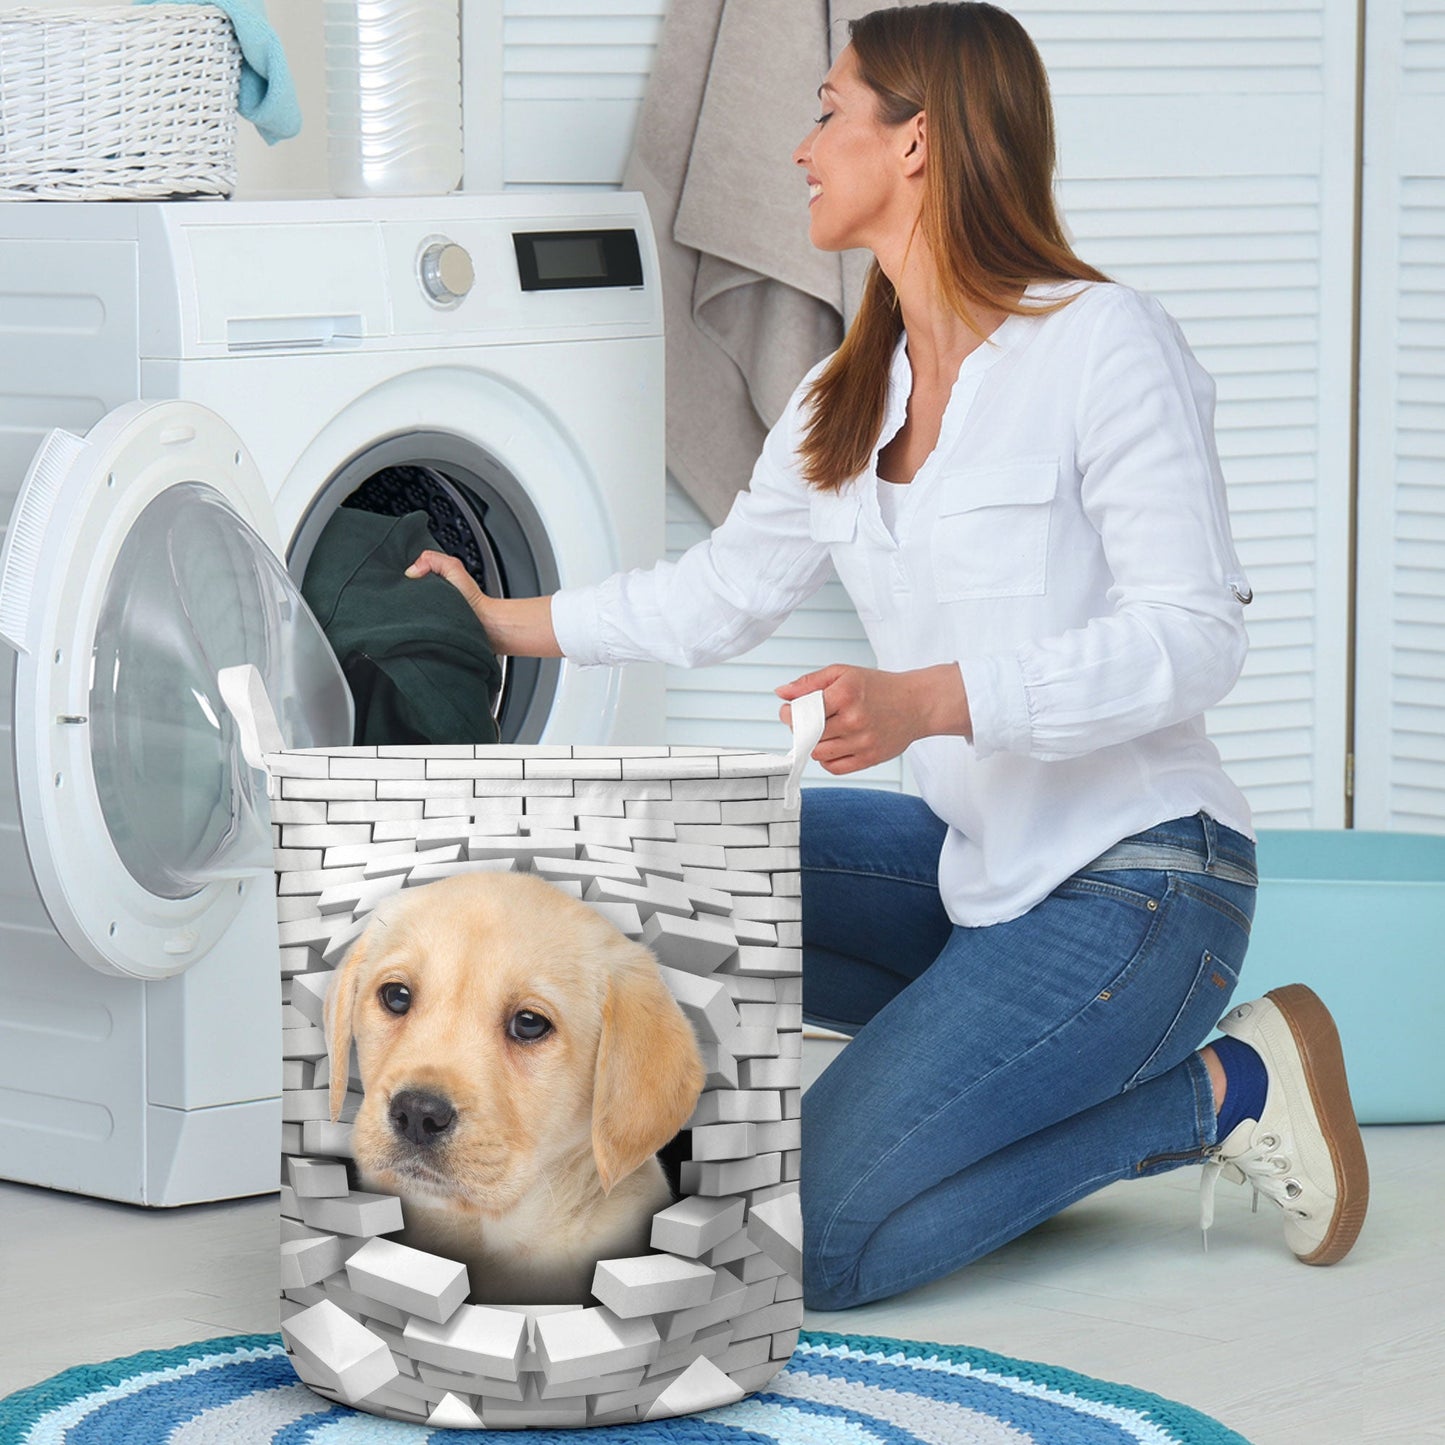 Labrador Retriever - In The Hole Of Wall Pattern Laundry Basket